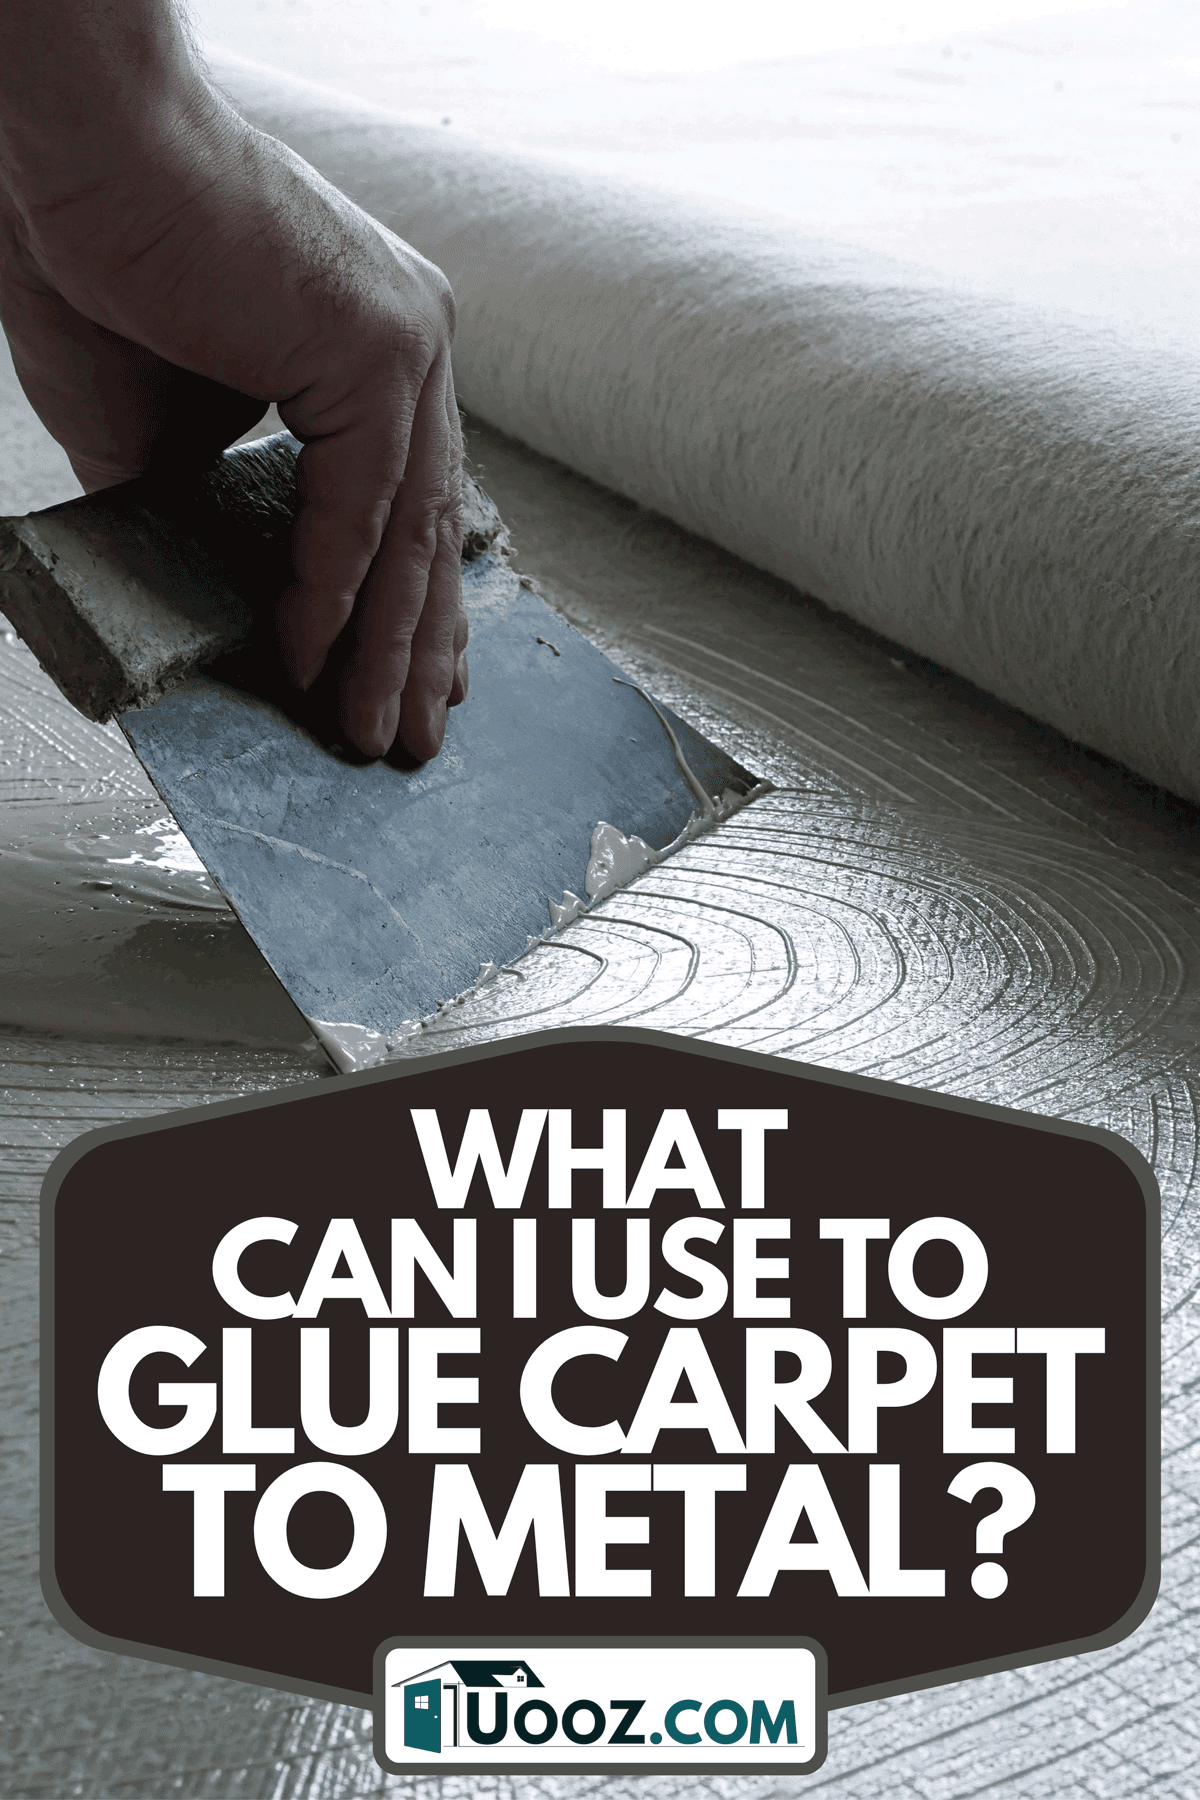 A floor fitter applying adhesive on the floor, What Can I Use To Glue Carpet To Metal?